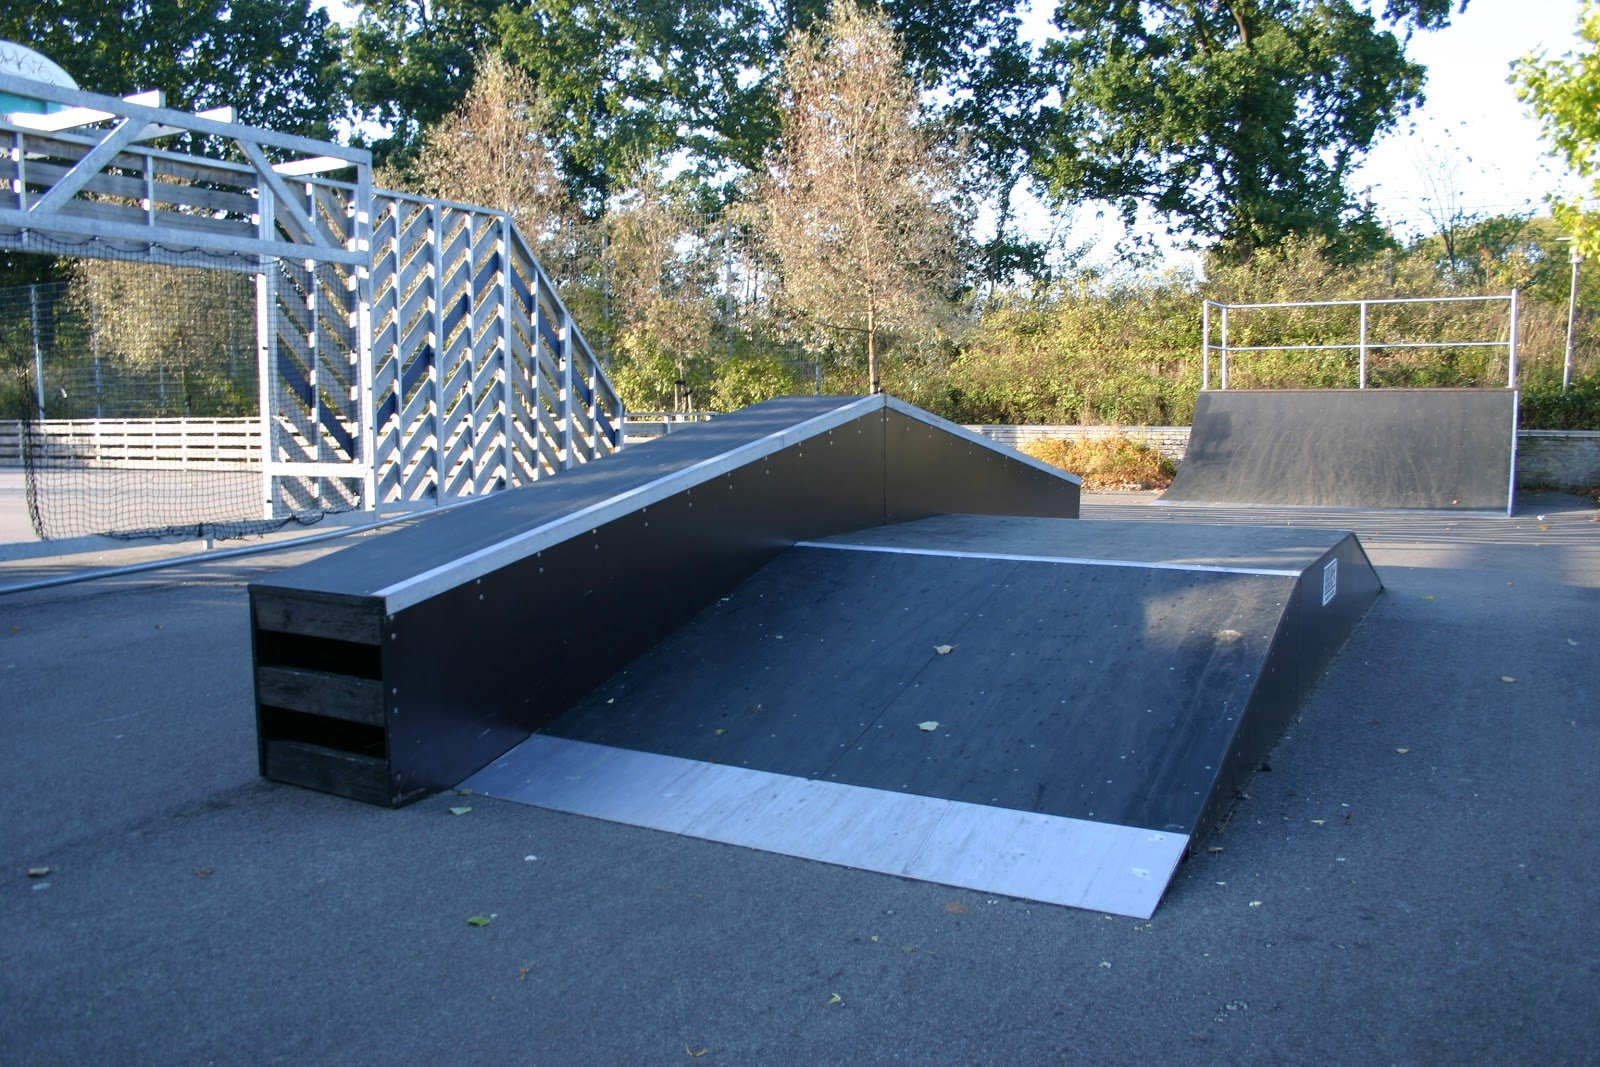 Albertslund Skatepark&nbsp;is relatively small and has a bank at one end, a fun box in the middle with an appurtenant ledge (a so-called hubba), and a quarter pipe at the other end. It also has a long pole rail and stone curbs. The foundation is asphalt. The skatepark is compact which can become a problem as you gain too much speed to perform tricks. The park is not worth traveling far to get to, however, if you are in the neighbourhood, you can stop by for a relaxed session. The park is located about 5 minutes from Albertslund station and is also close to the graffiti wall between Kongsholmhallen and the bicycle track if you follow the railroad.Albertslund Skatepark was built in September of 2012 by Skateland Constructions. It also has street hockey and soccer. The ramps were built after the student city council day in 2011 when all 6th grades of Albertslund presented suggestions for projects in the town. This story goes to show that there is a lot of support for skate-ideas. If you dream it, you can make it happen. Even if your in 6th grade. Awesome Idea?